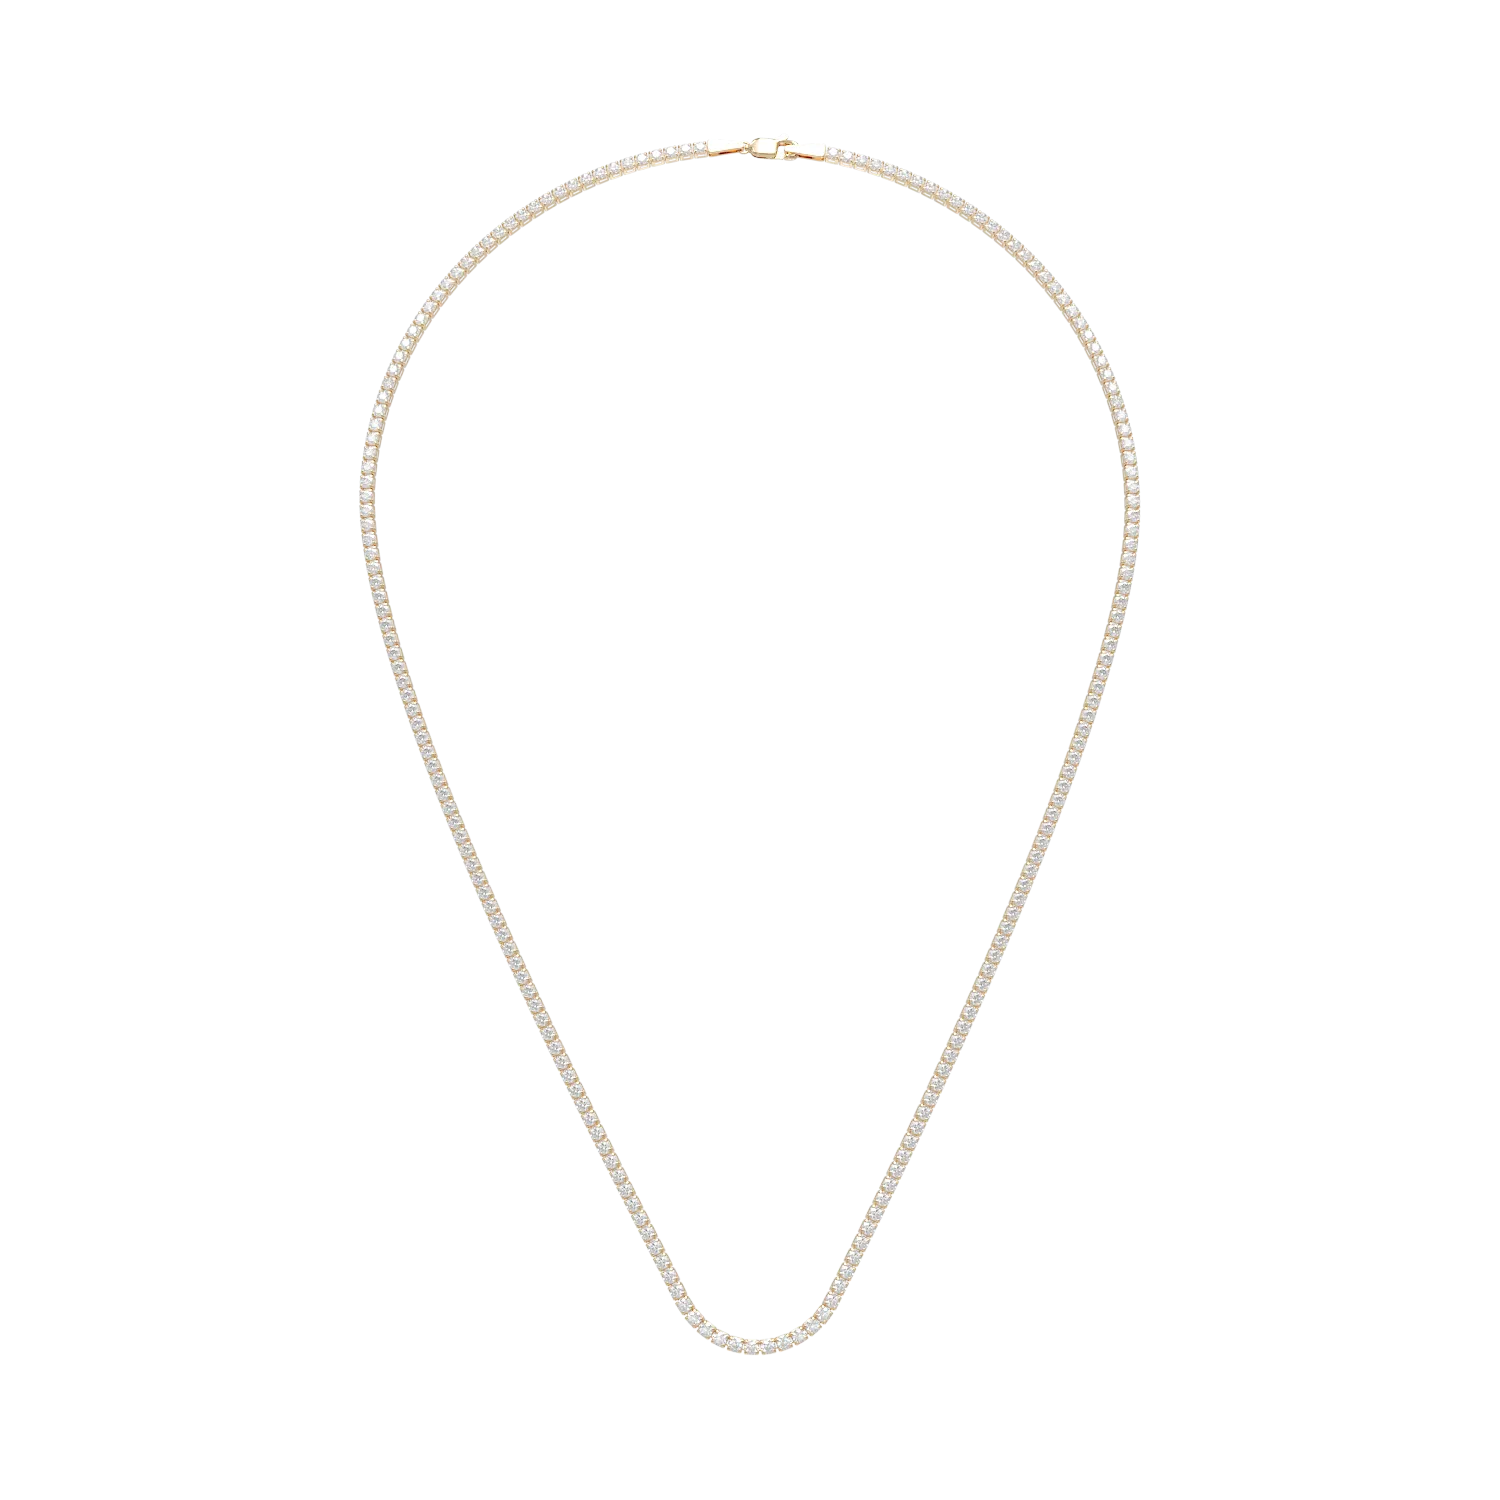 14K yellow gold tennis necklace